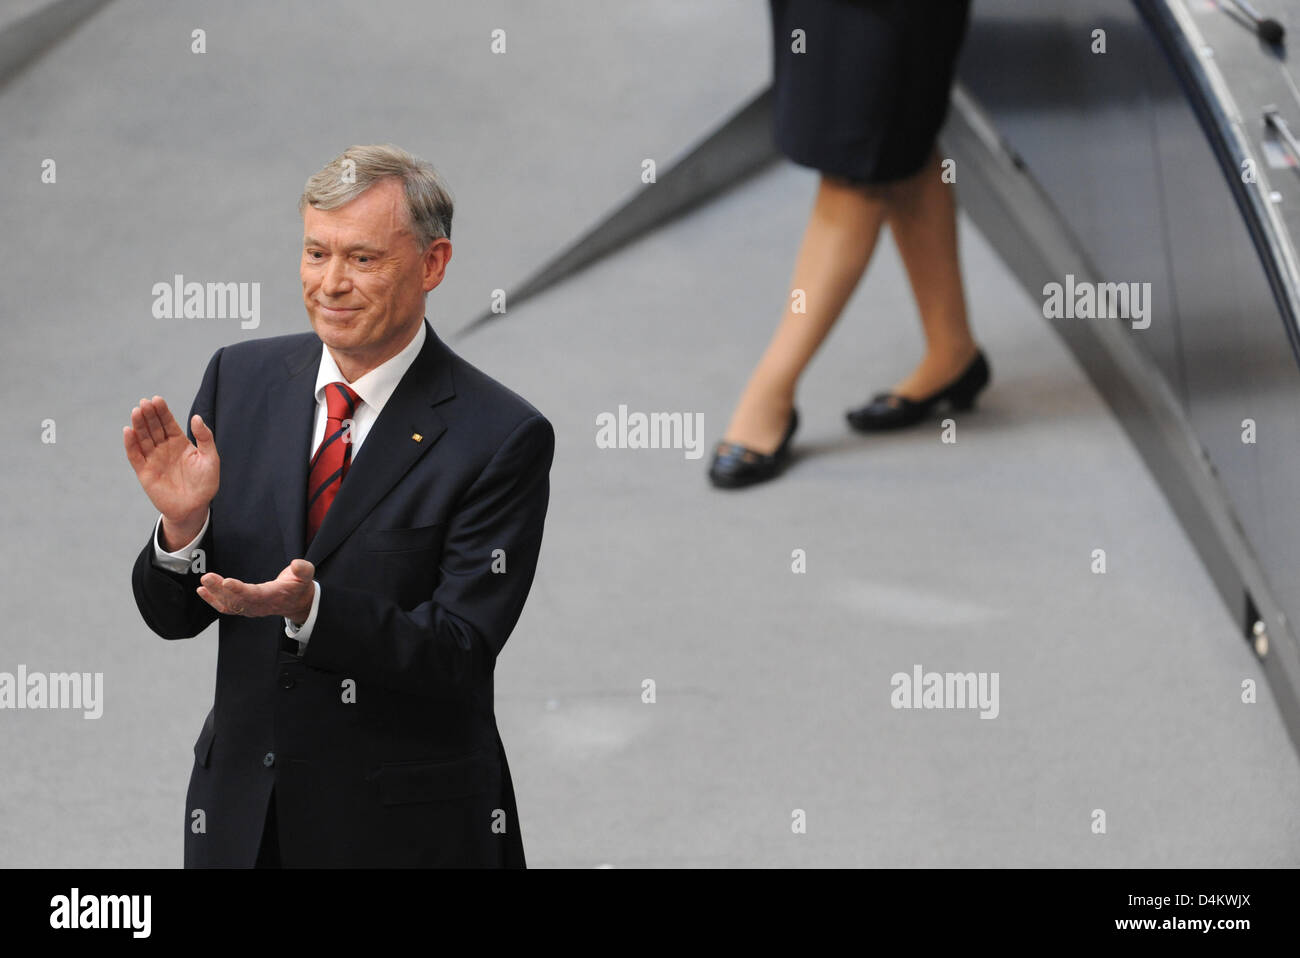 Federal German President Horst Koehler smiles after his reelection at the 13th Federal Convention in the plenar hall of the Reichstag building in Berlin, Germany, 23 May 2009. Koehler won the election with 613 votes, the minimum number of necessary votes. Photo: Peer Grimm Stock Photo